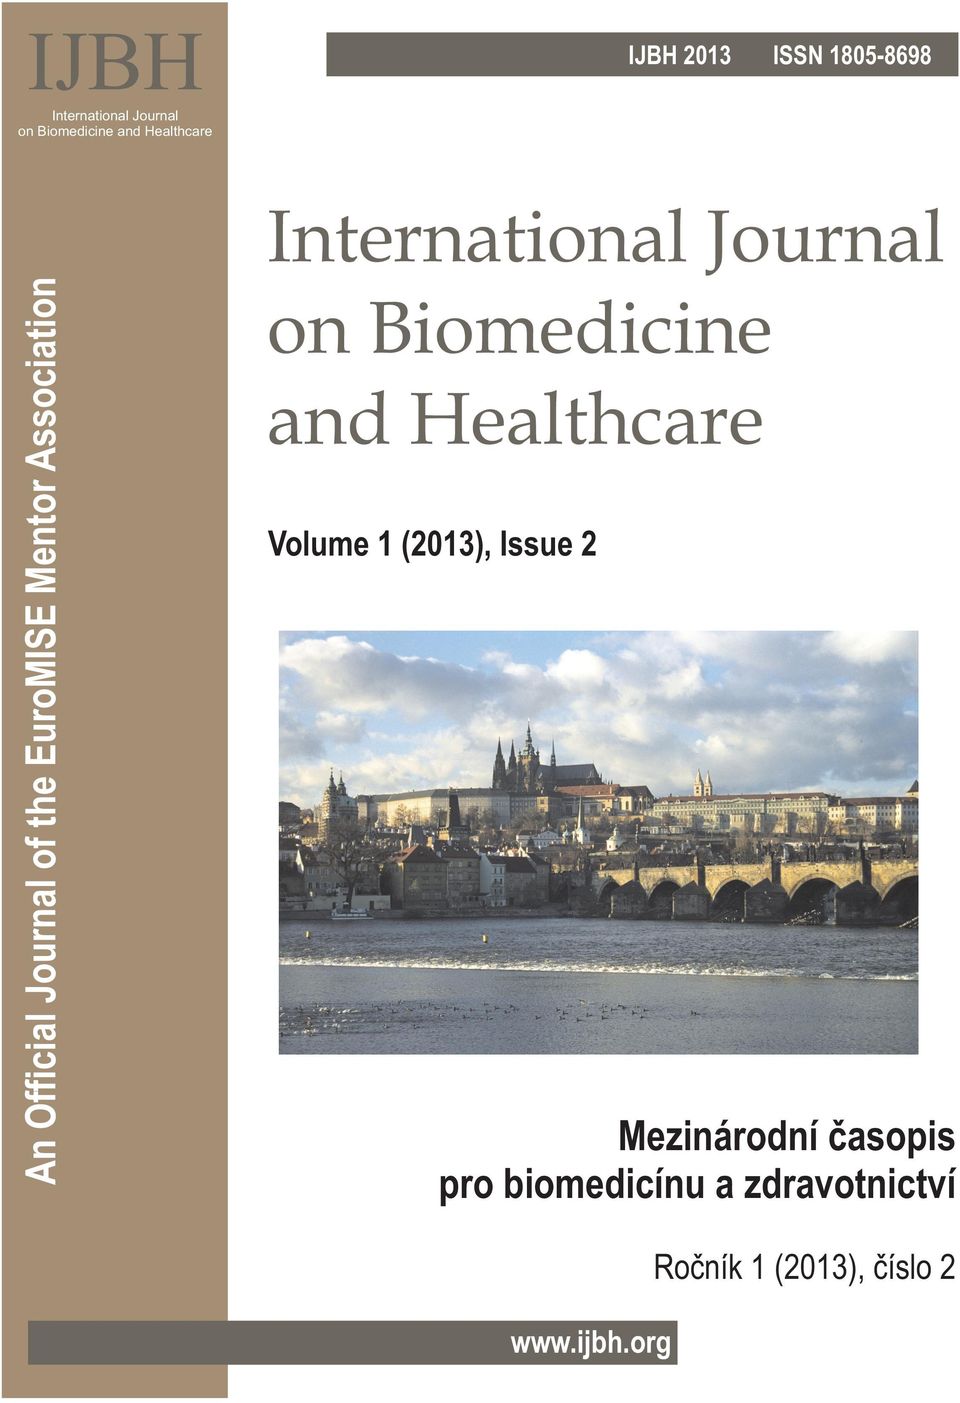 International Journal on Biomedicine and Healthcare Volume 1 (2013), Issue